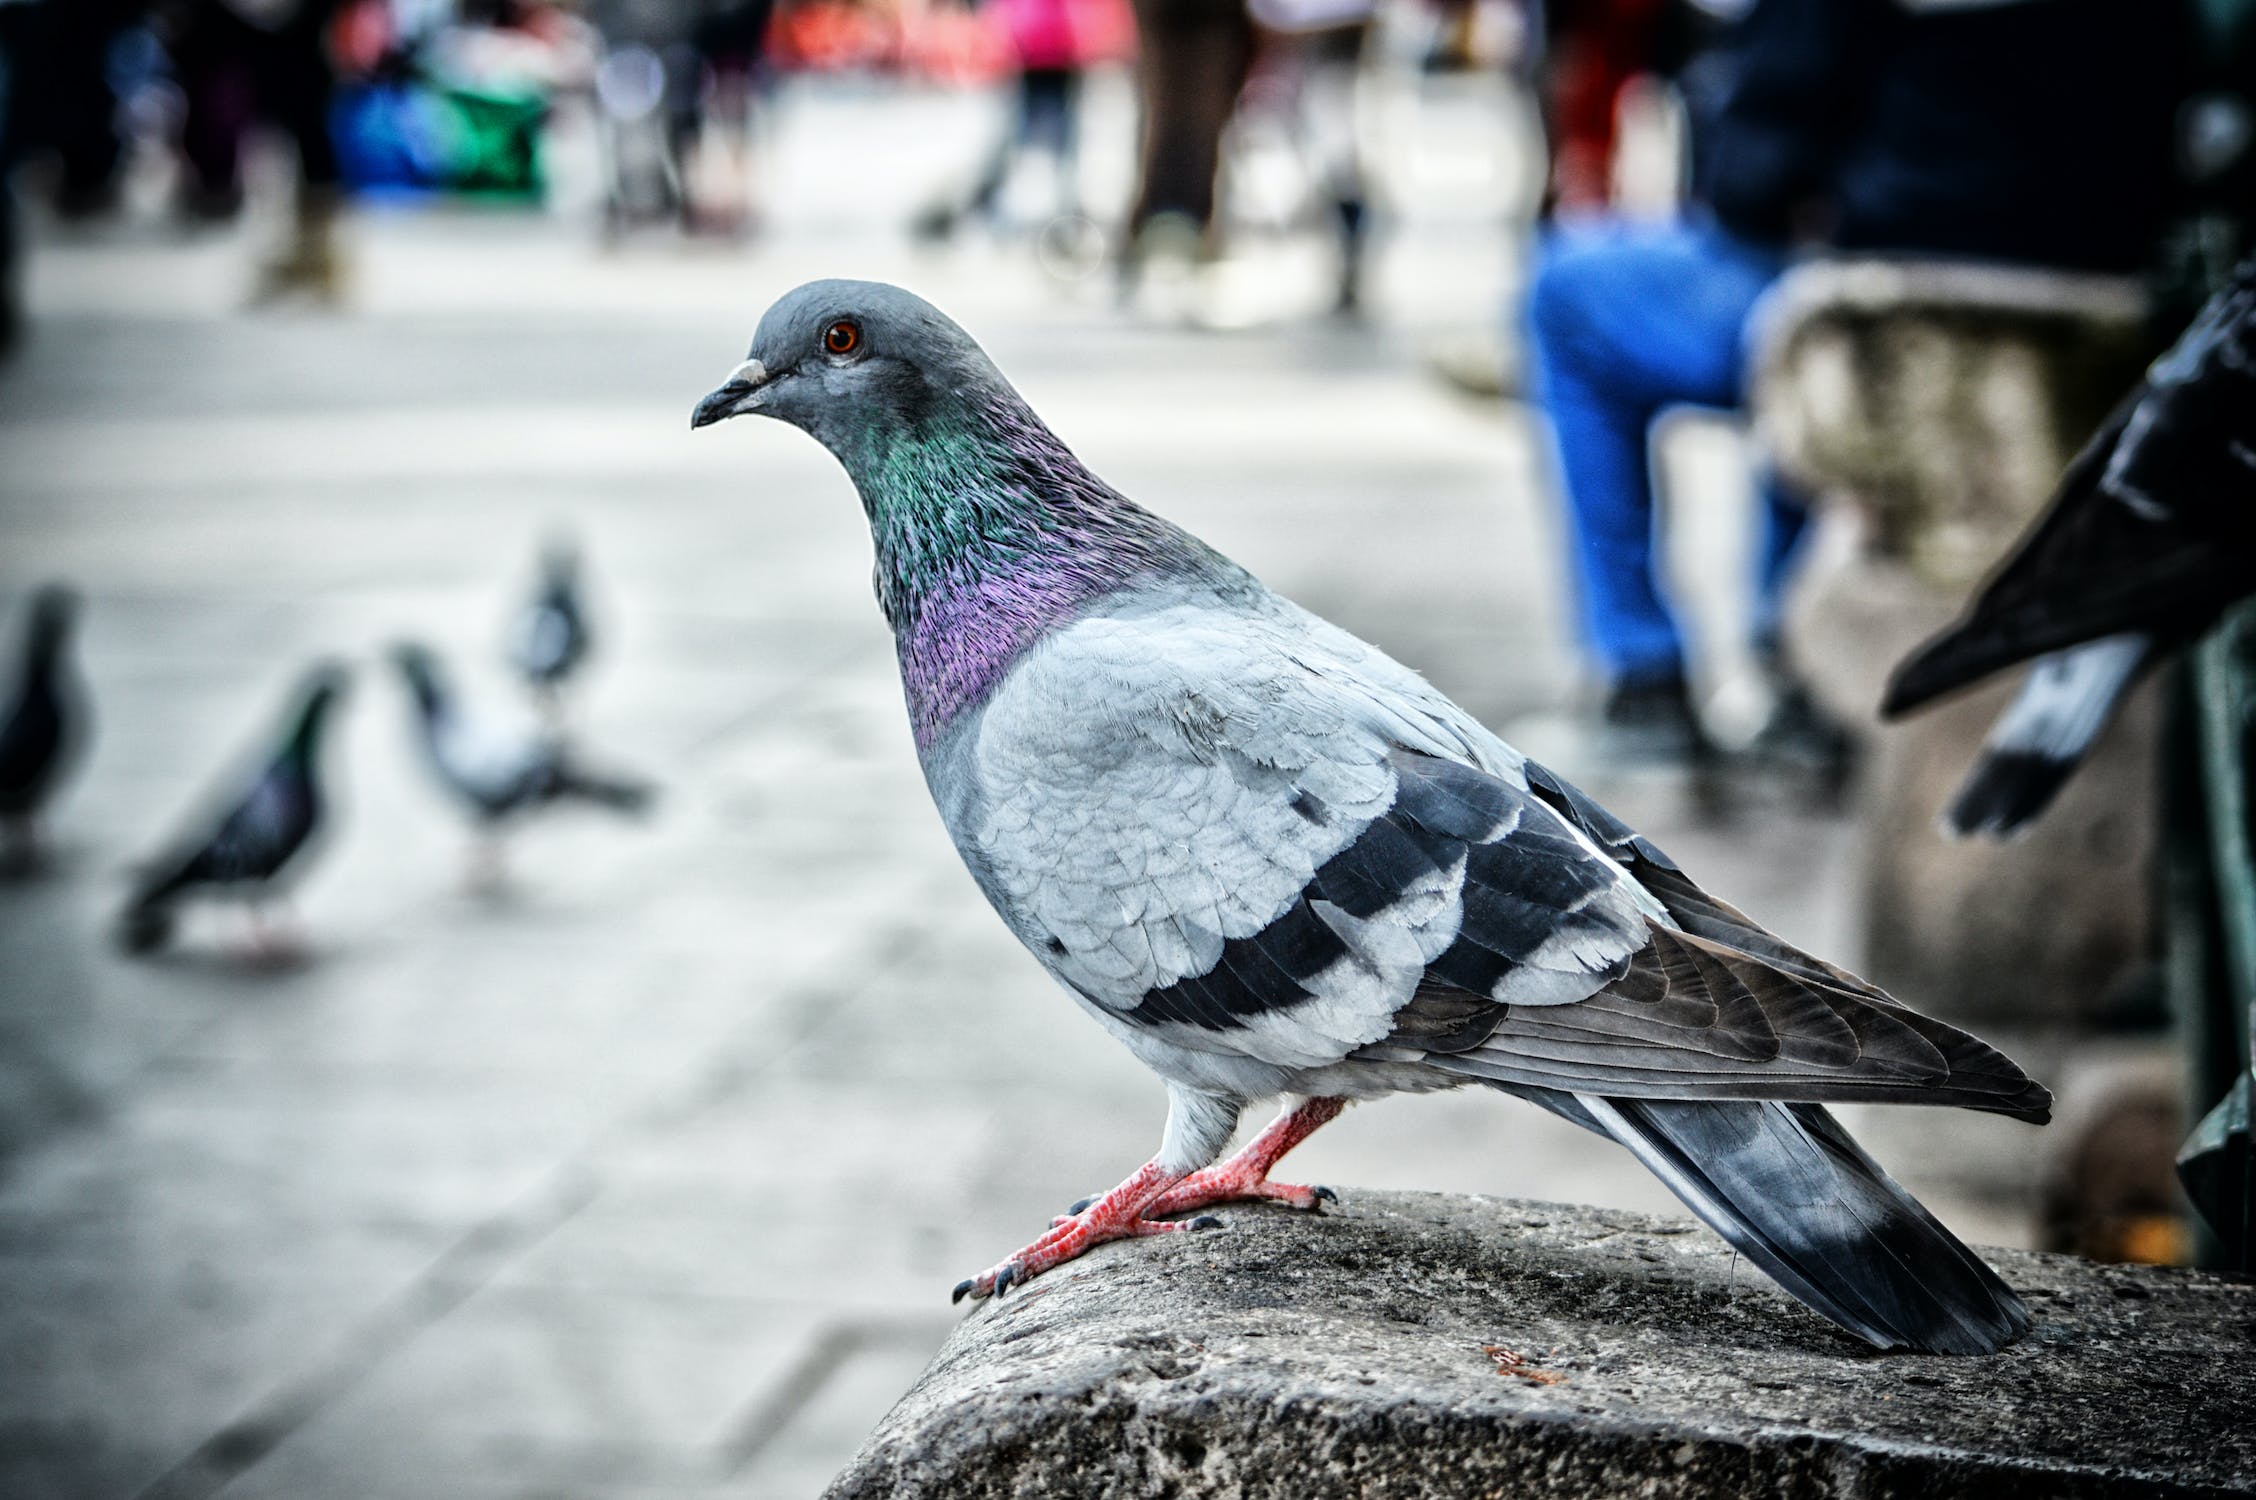 How to Control Pigeons’ Population Growth Without Killing Them